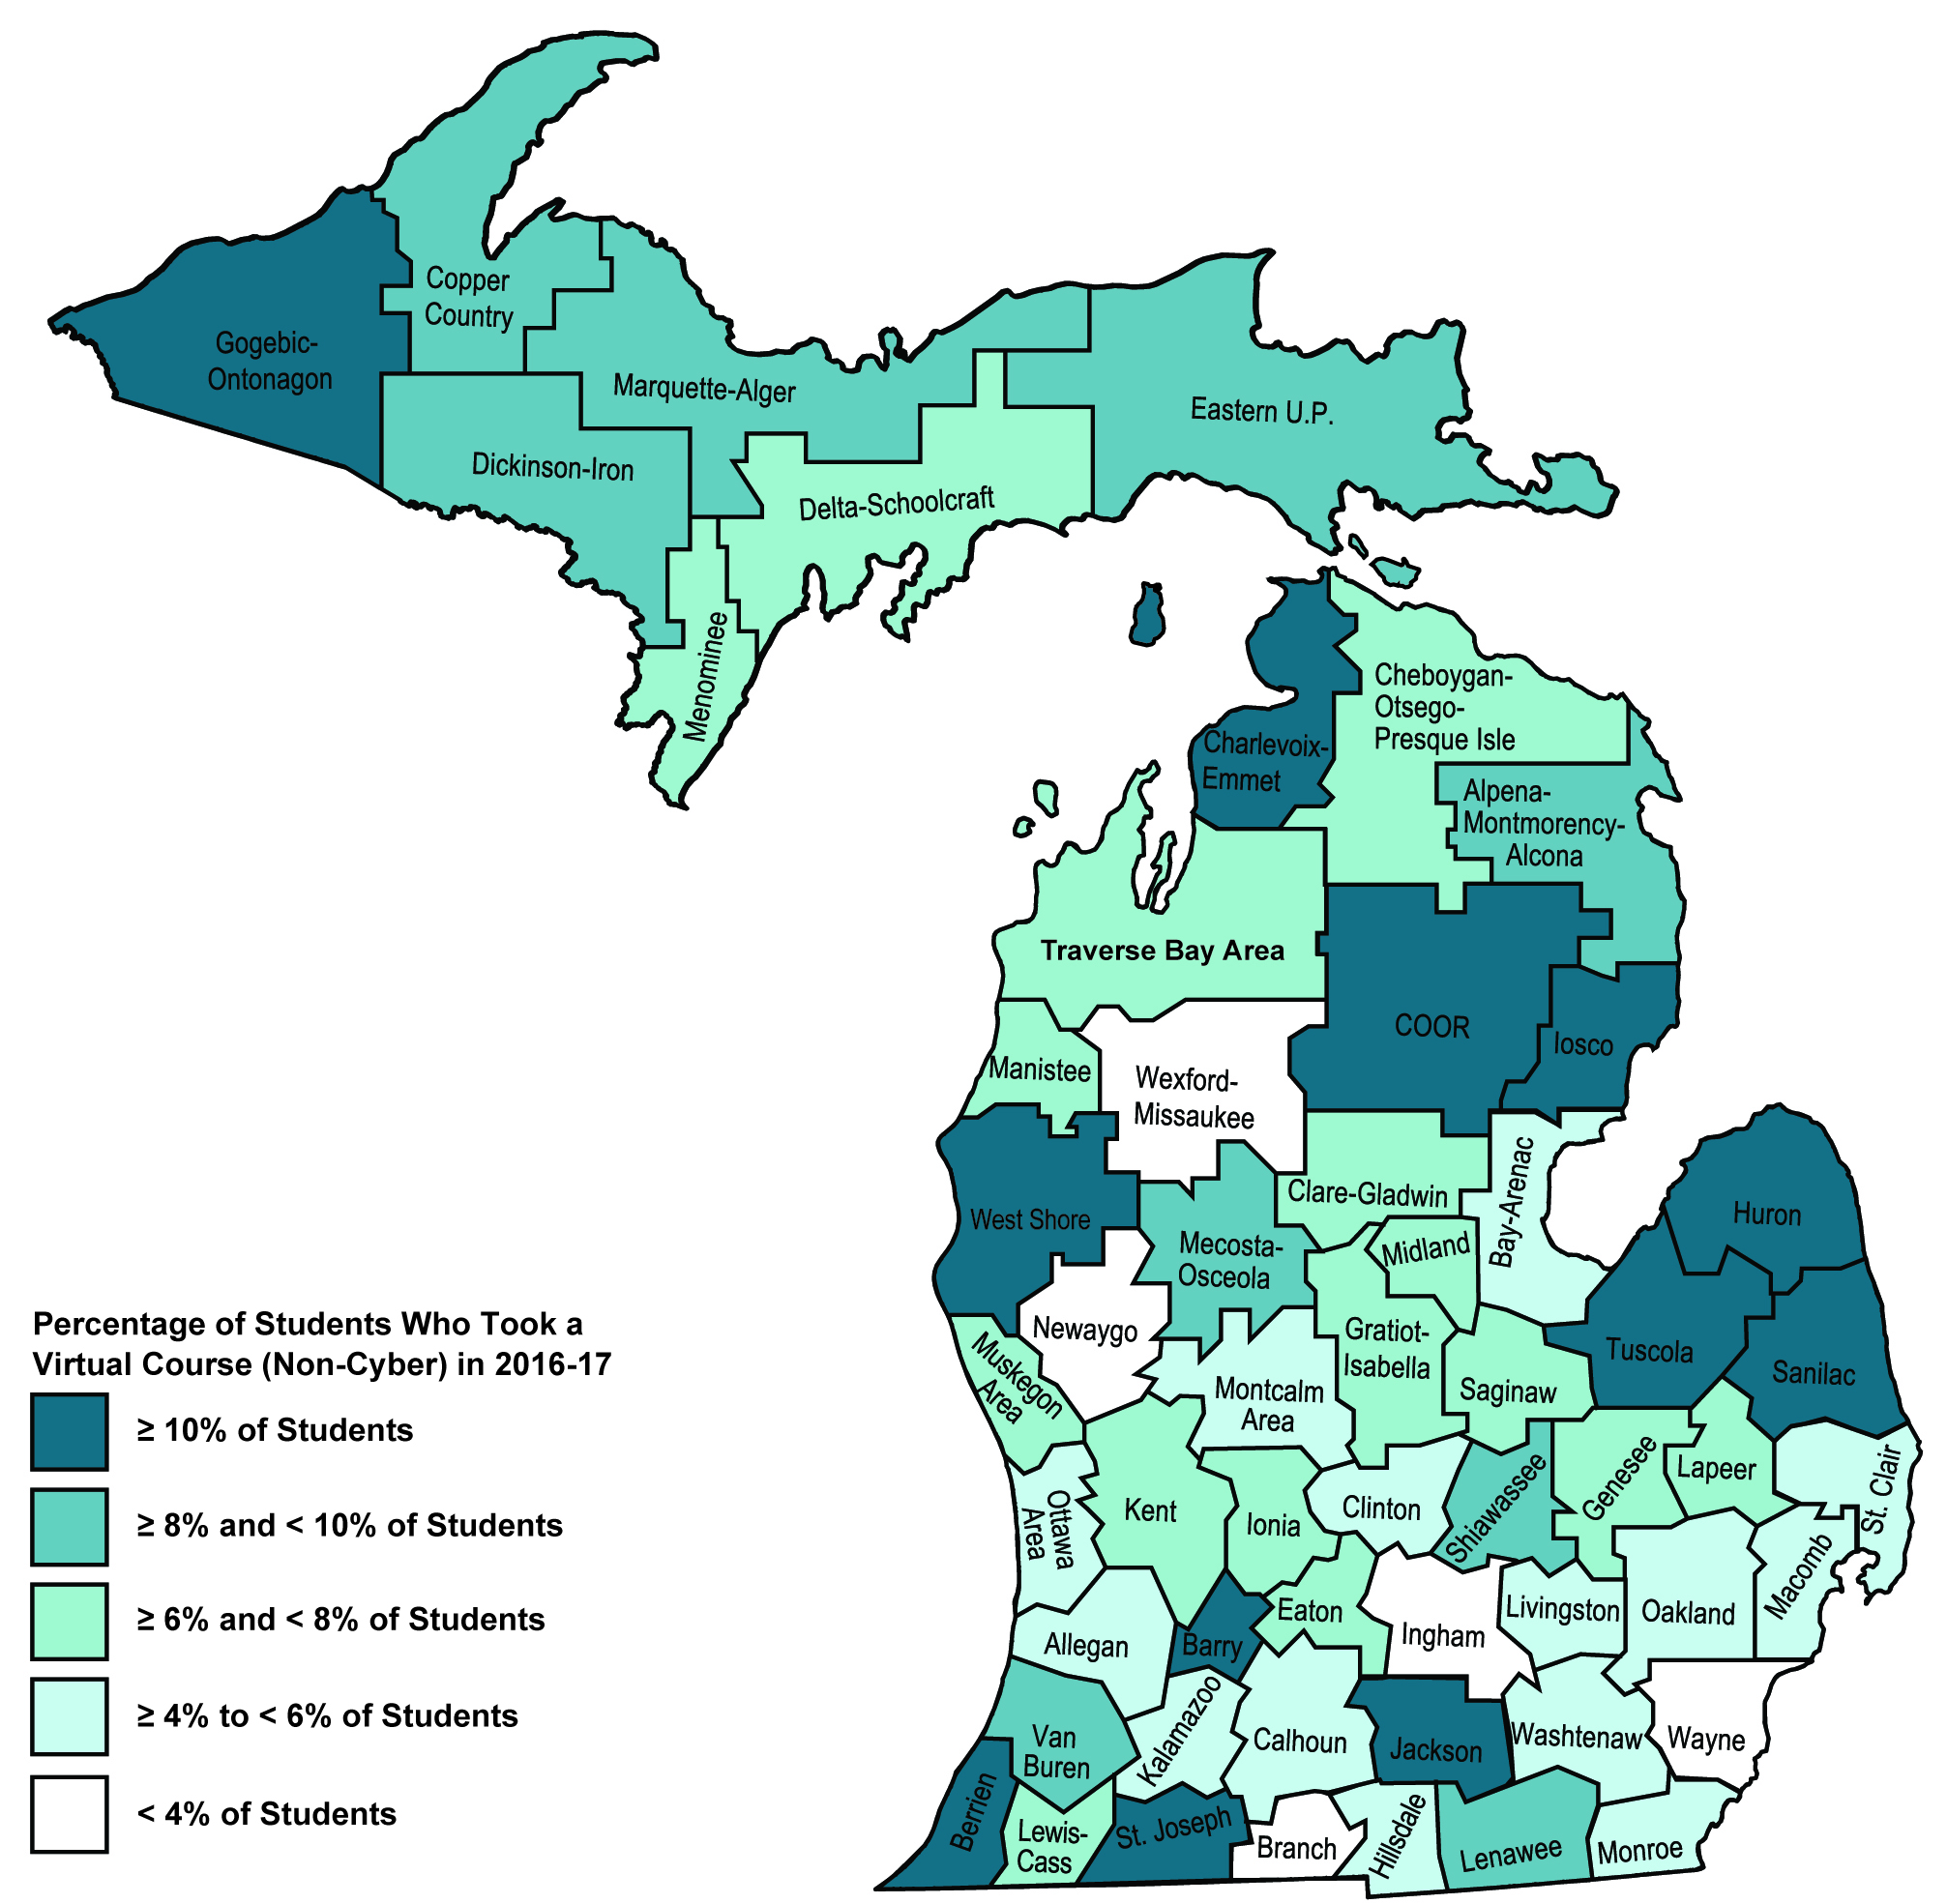 Map shows Michigan ISDs colored by the percentage of virtual courses. All but five counties have some color of blue meaning they have at least 4% of more of their students taking a virtual course (non-cyber) in 2016-17. In contrast, 12 ISDs had more than 10%; those ISDs were listed in the preceding paragraph.